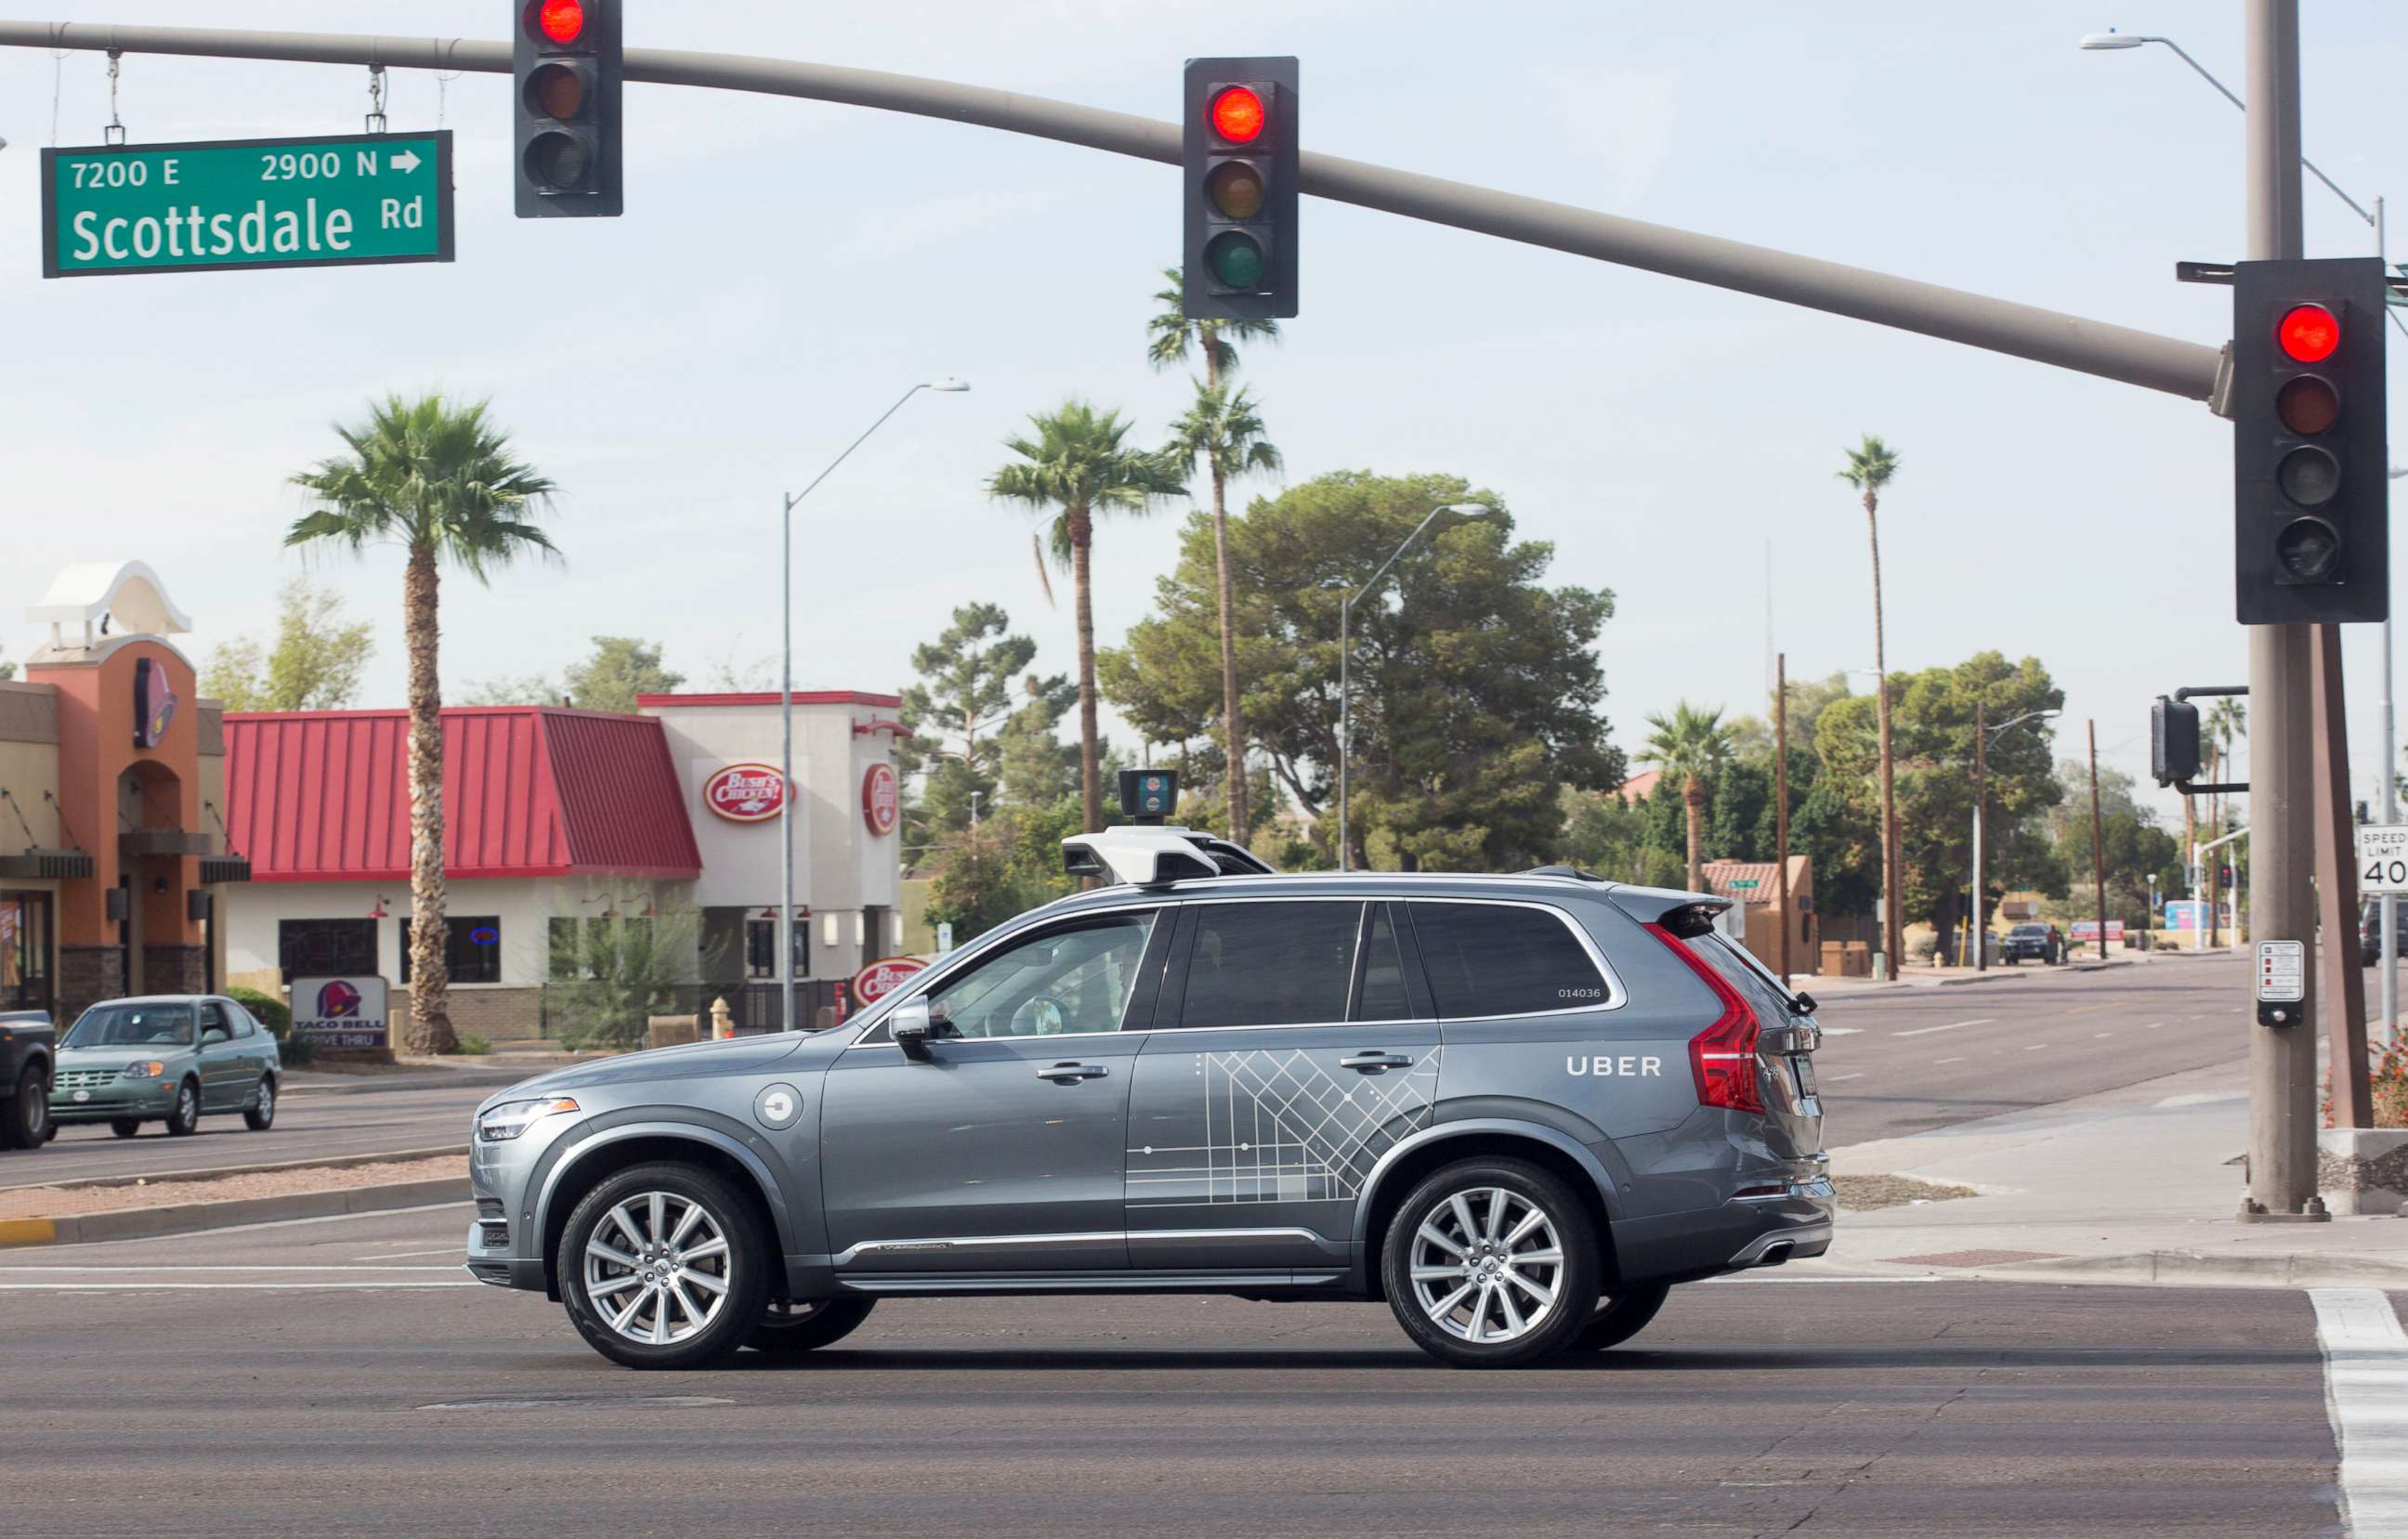 PHOTO: A self driving Volvo vehicle owned by Uber moves through an intersection in Scottsdale, Ariz., Dec. 1, 2017.